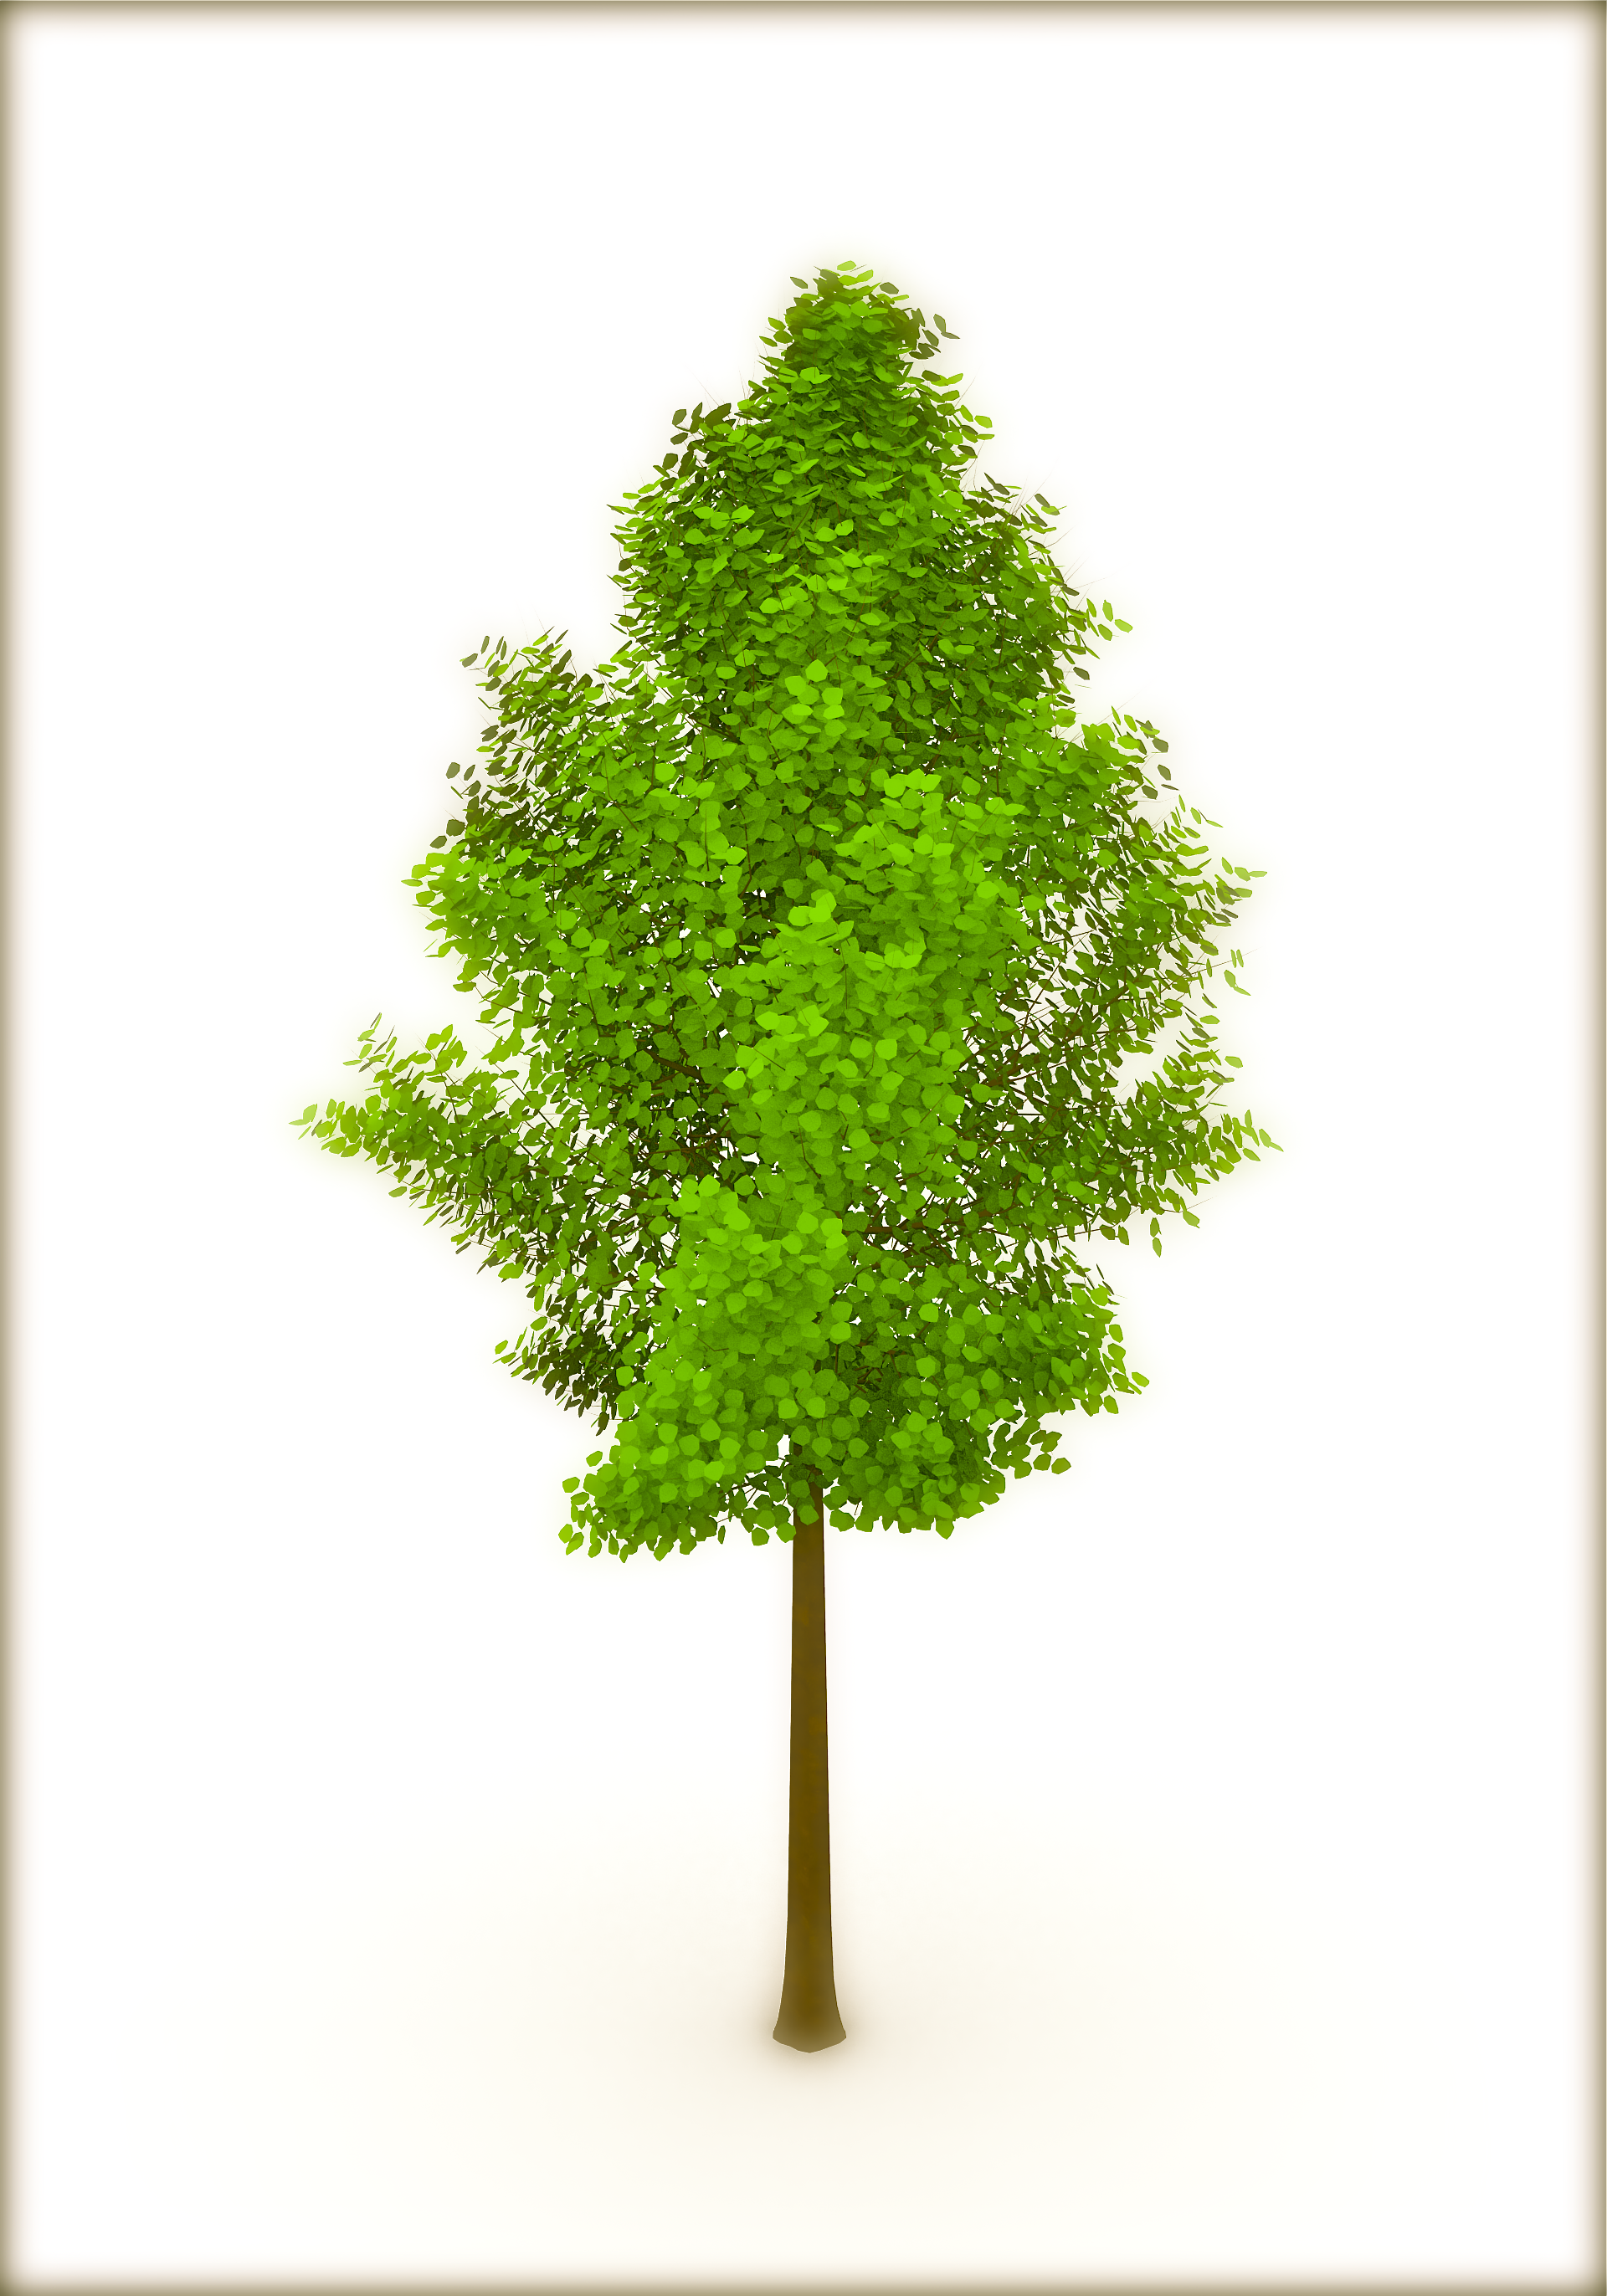 Earth Day Trees! (or a single tree) | Corner 3d